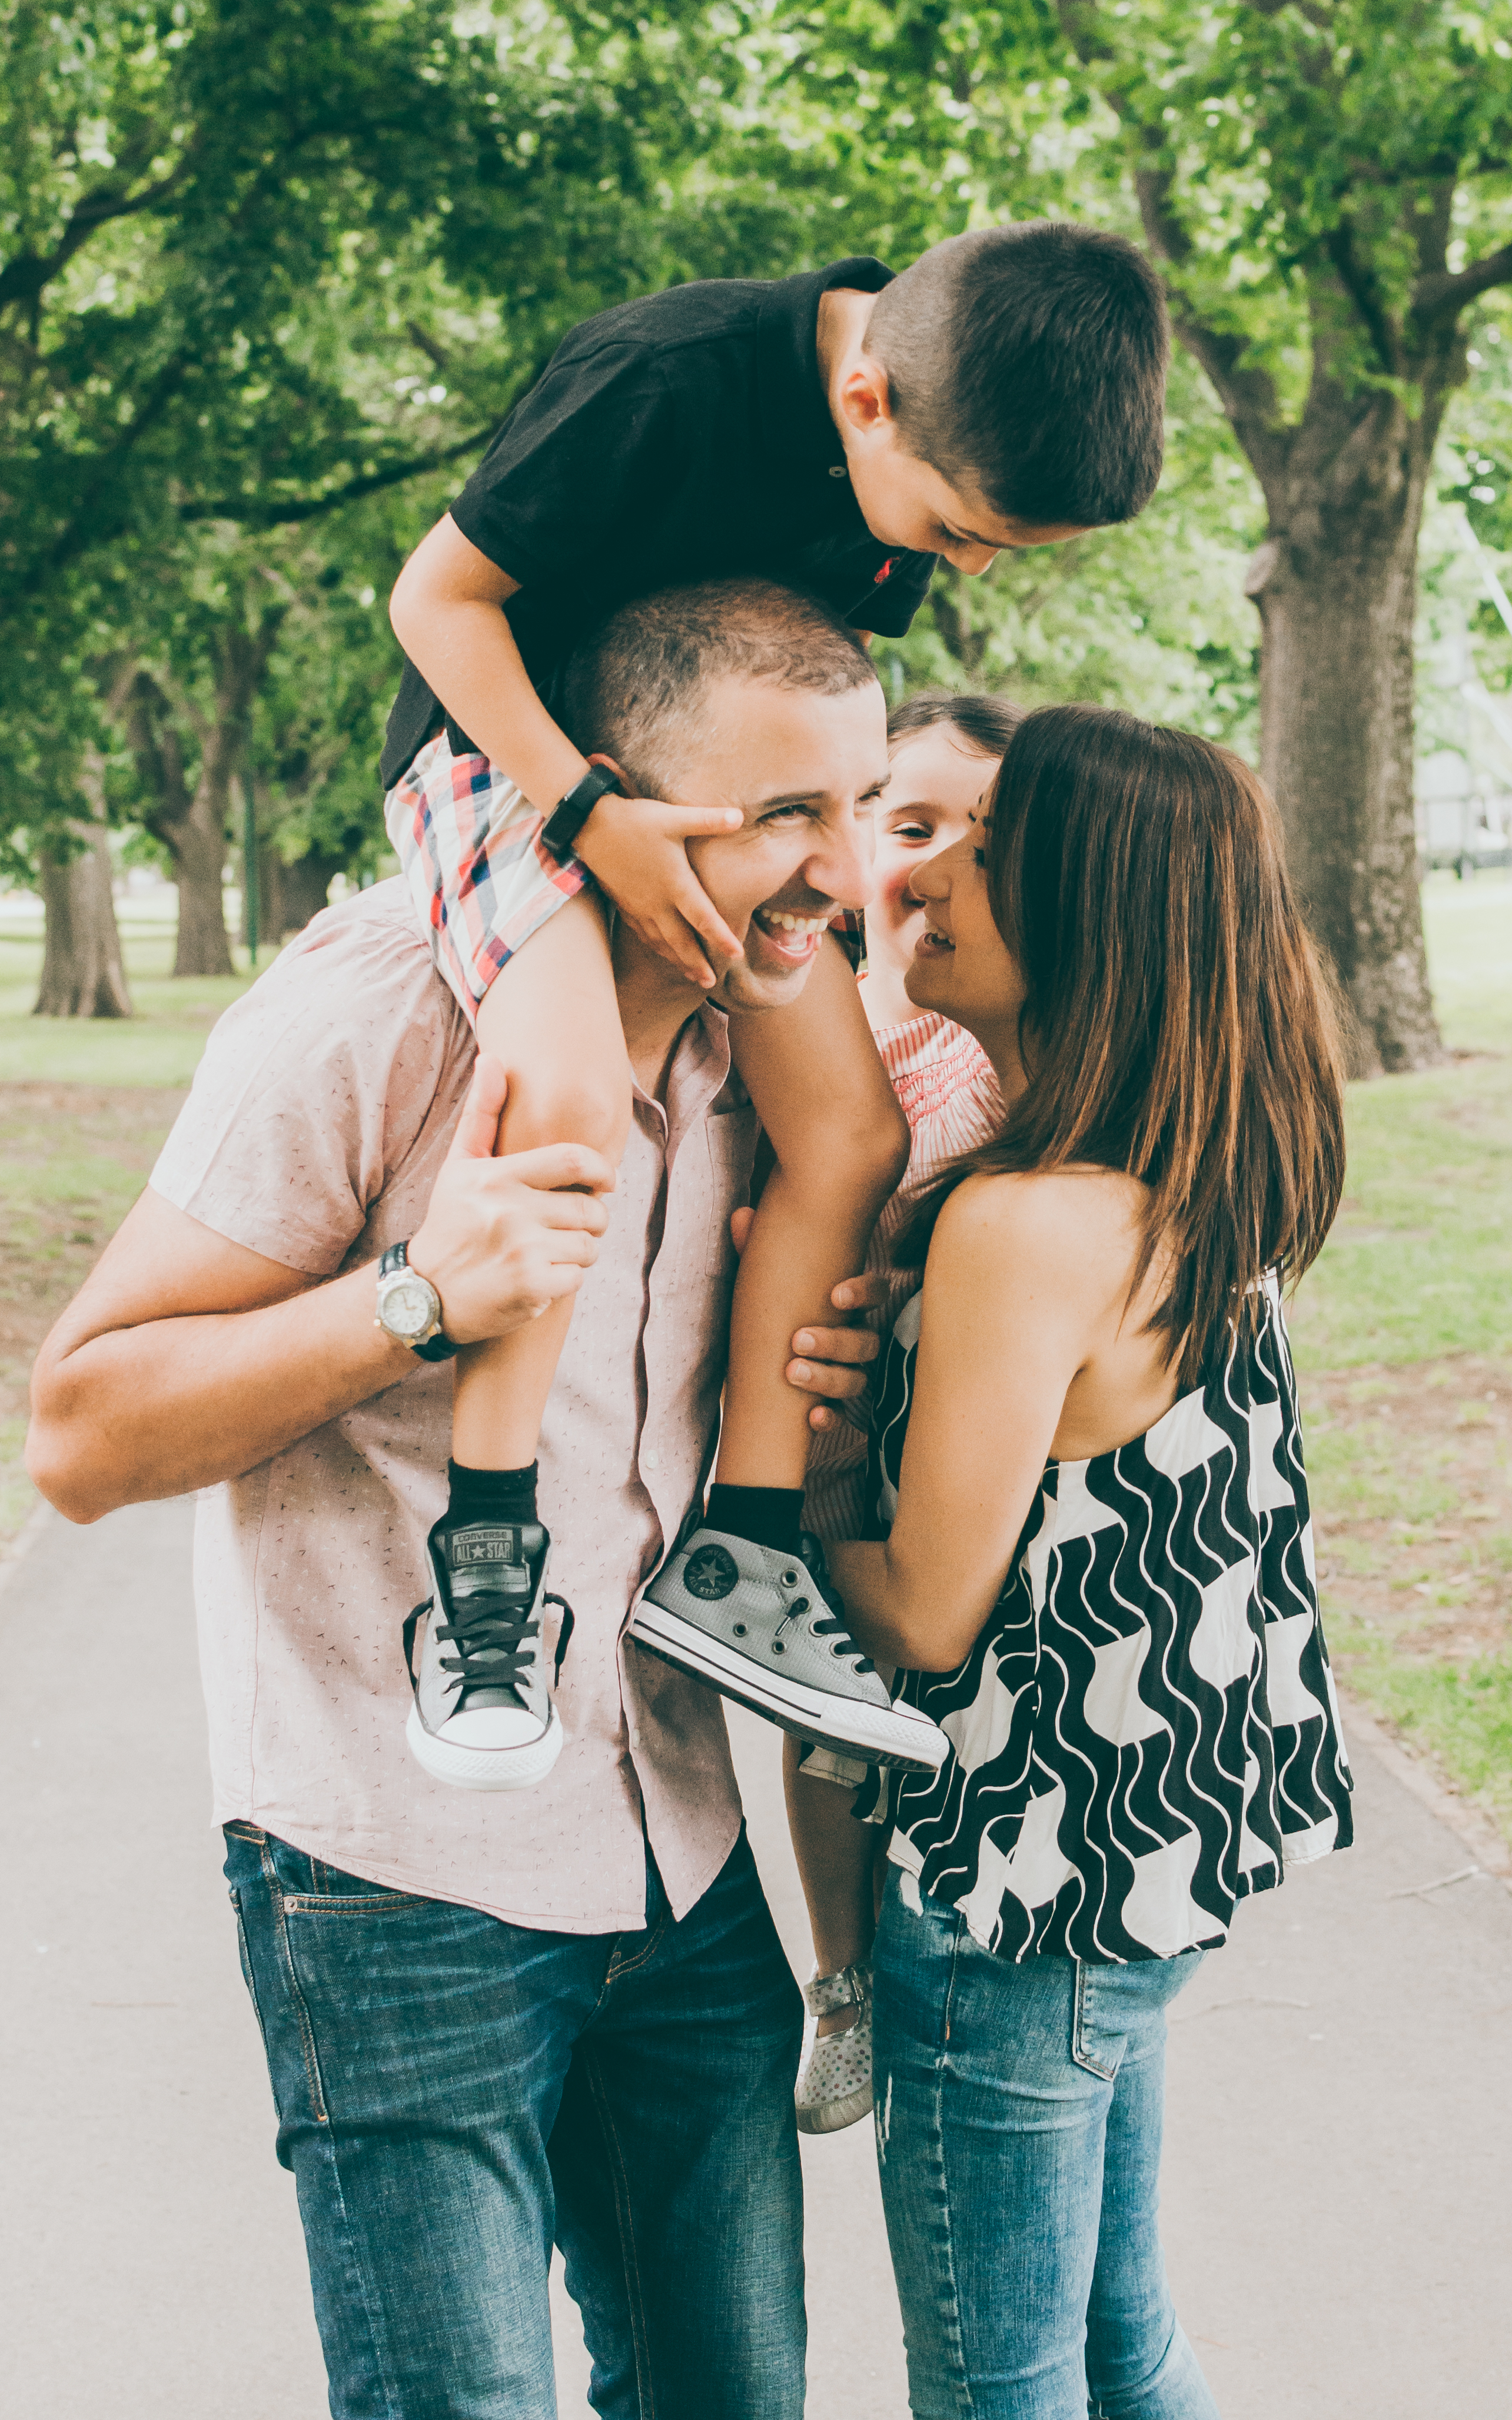 Melbourne Lifestyle photographer Liyat G Haile documents and captures happy family whispering, smiling, interacting and connecting